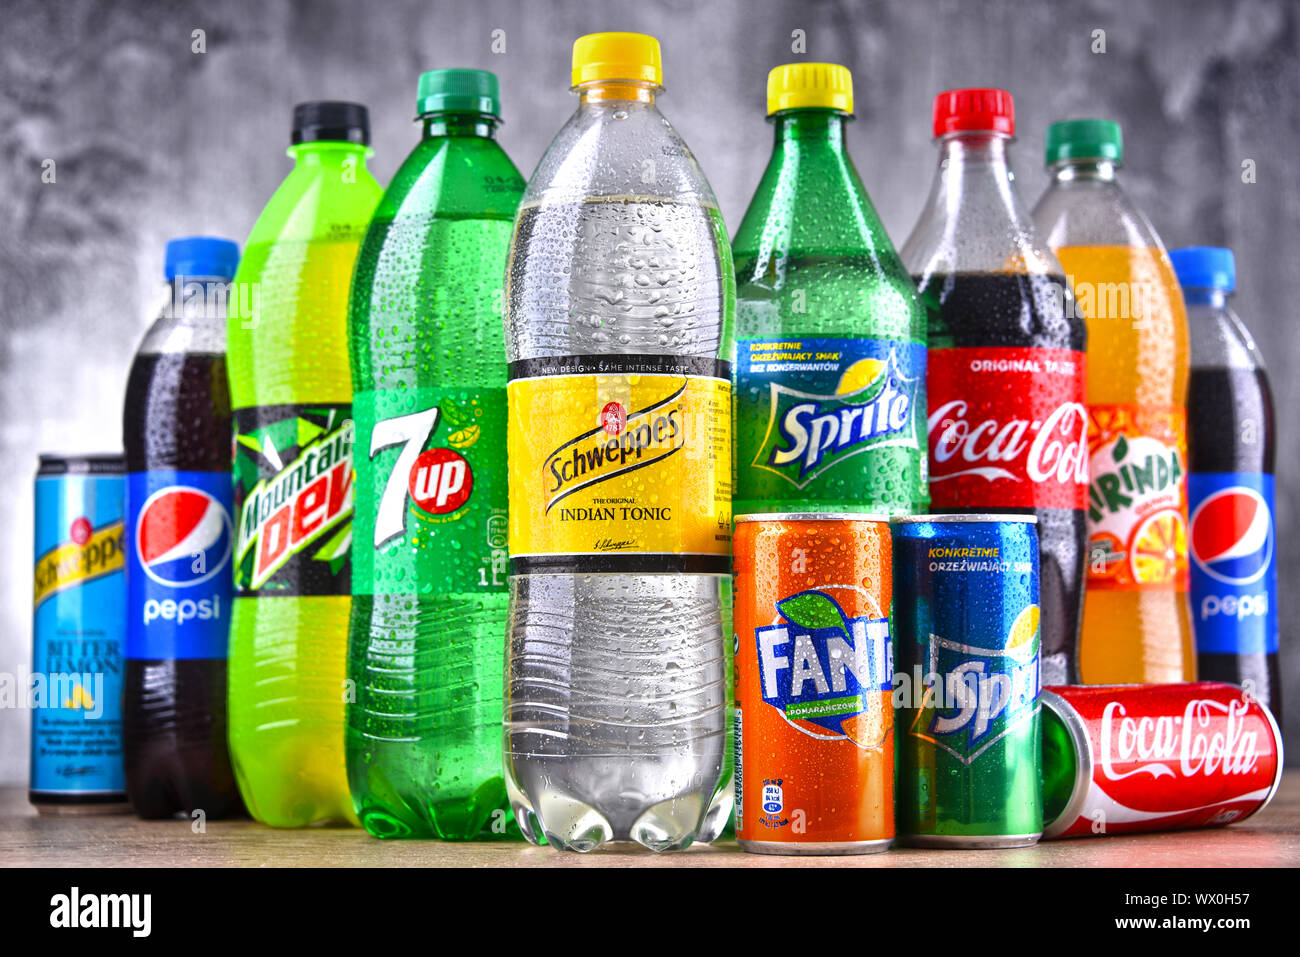 https://c8.alamy.com/comp/WX0H57/bottles-of-global-soft-drink-brands-including-products-of-coca-cola-company-and-pepsico-WX0H57.jpg